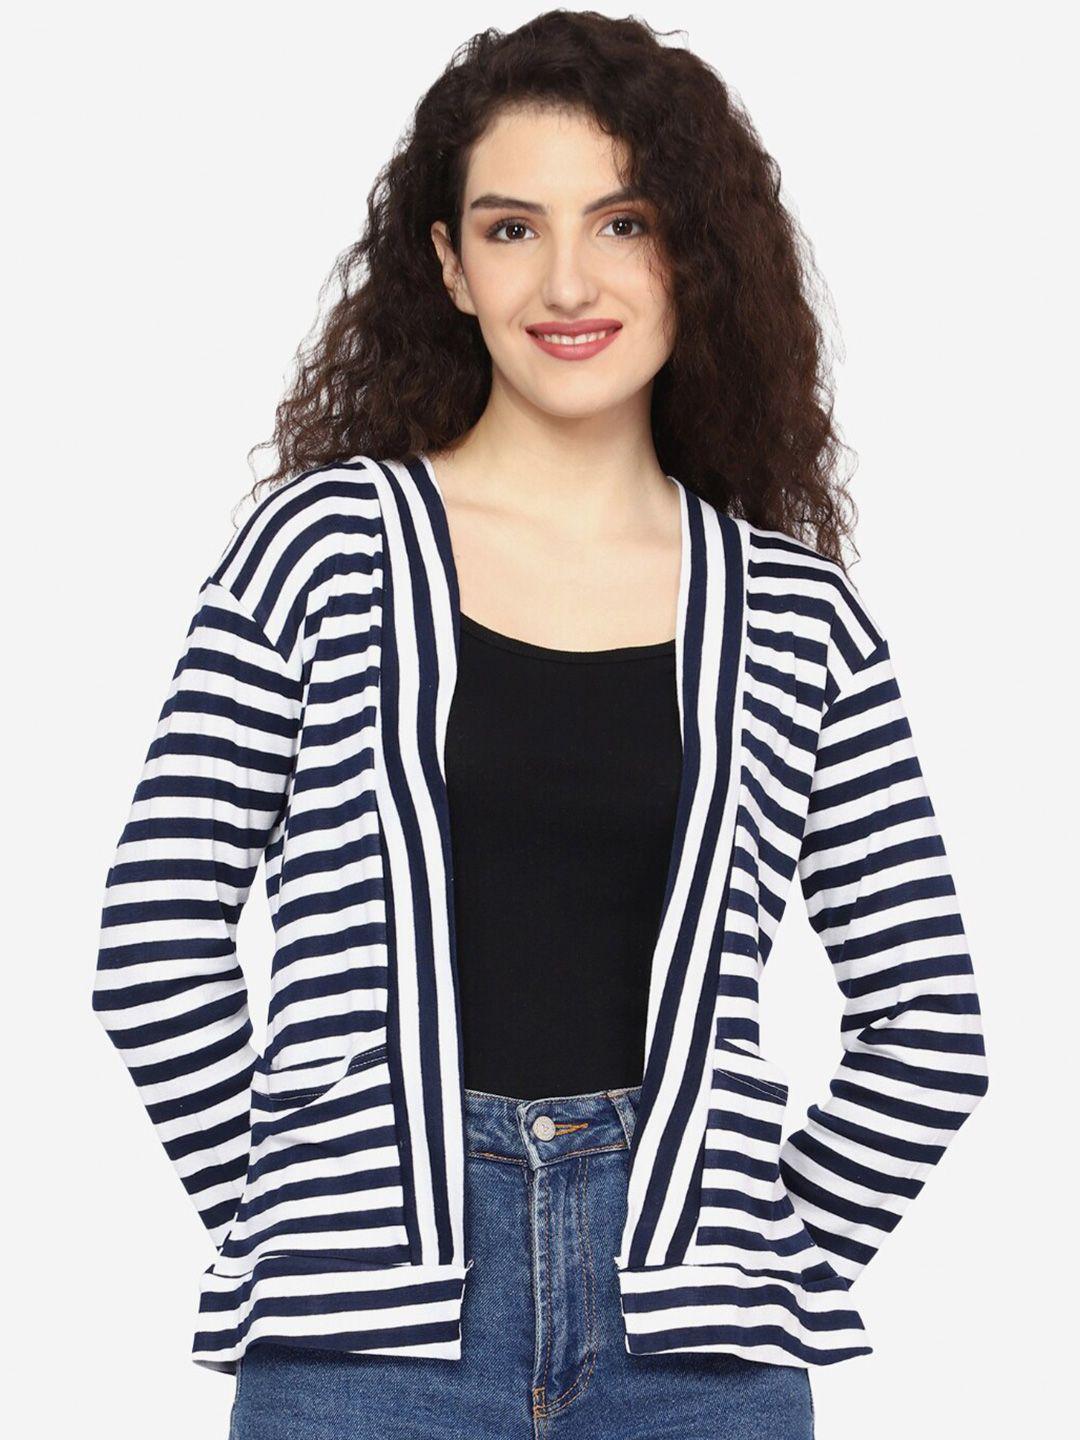 teemoods striped open front shrug